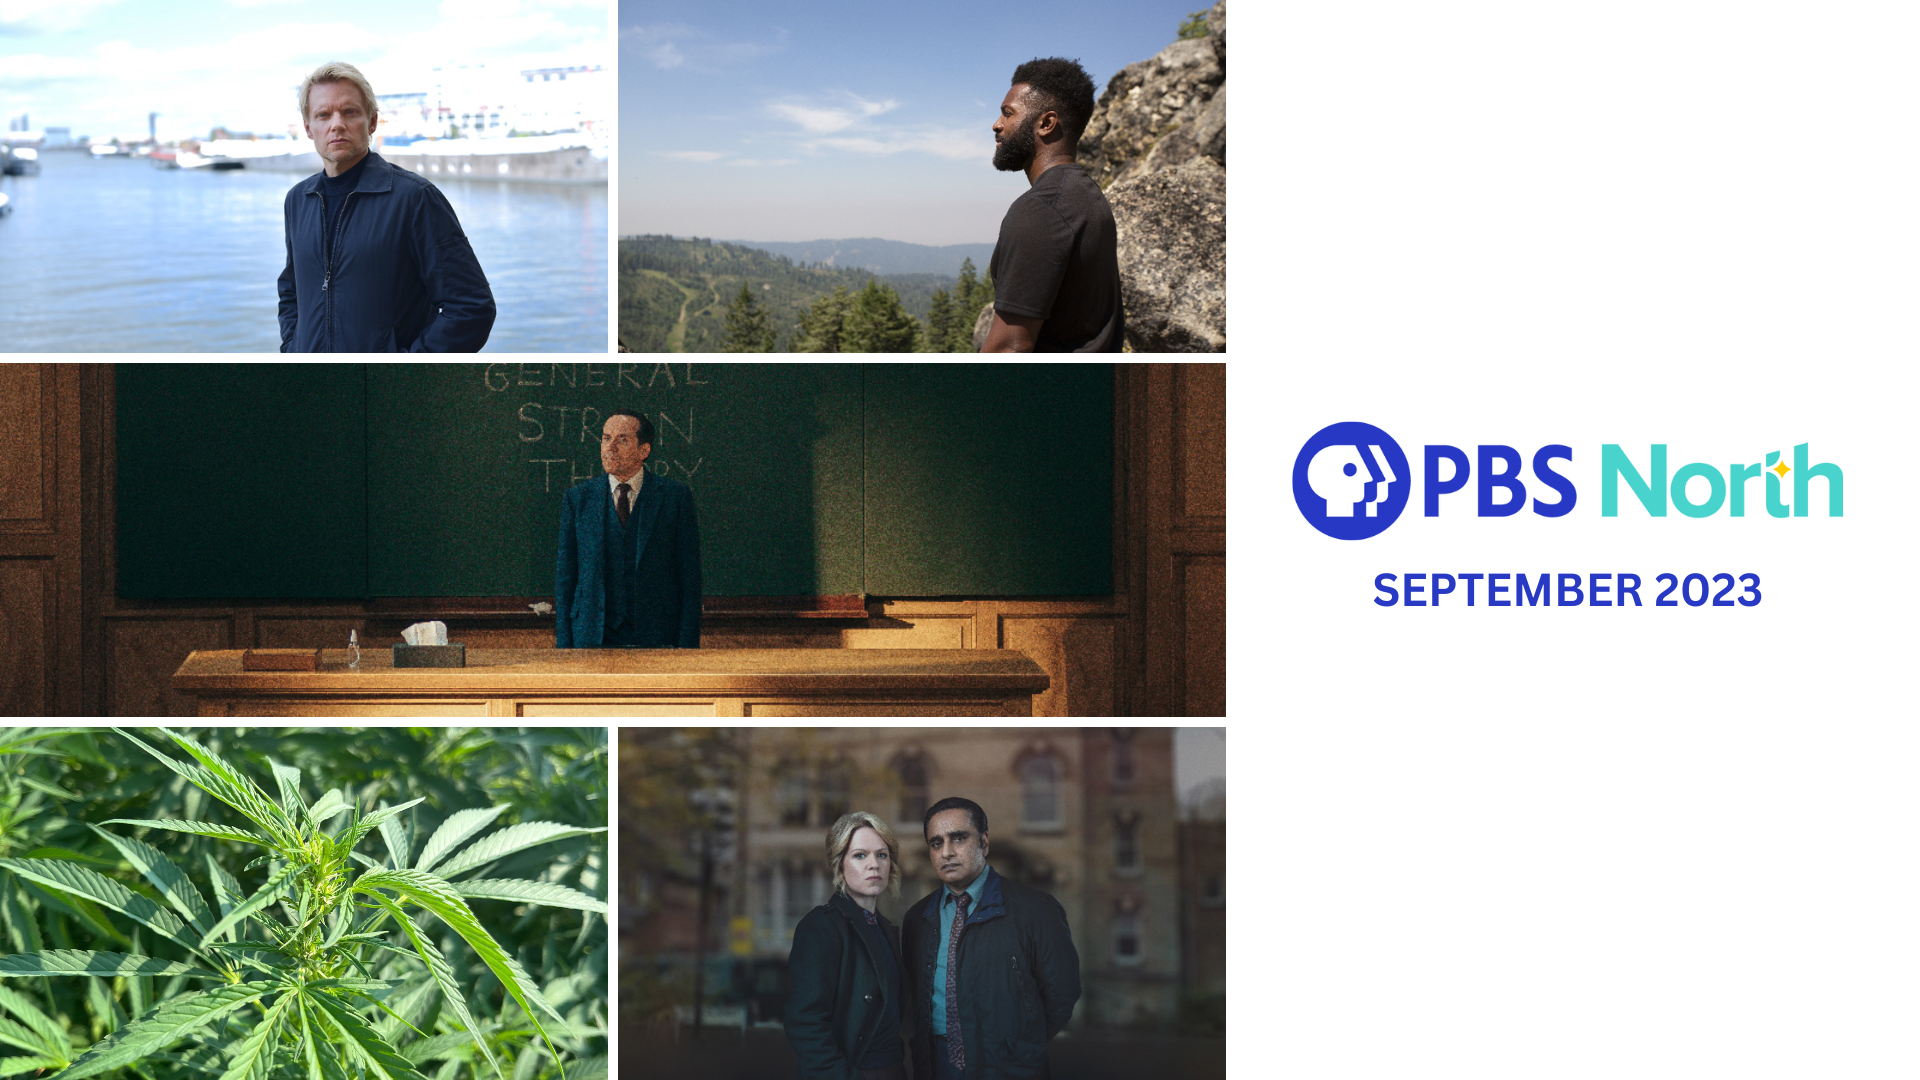 featured shows for the month of september on PBS North.